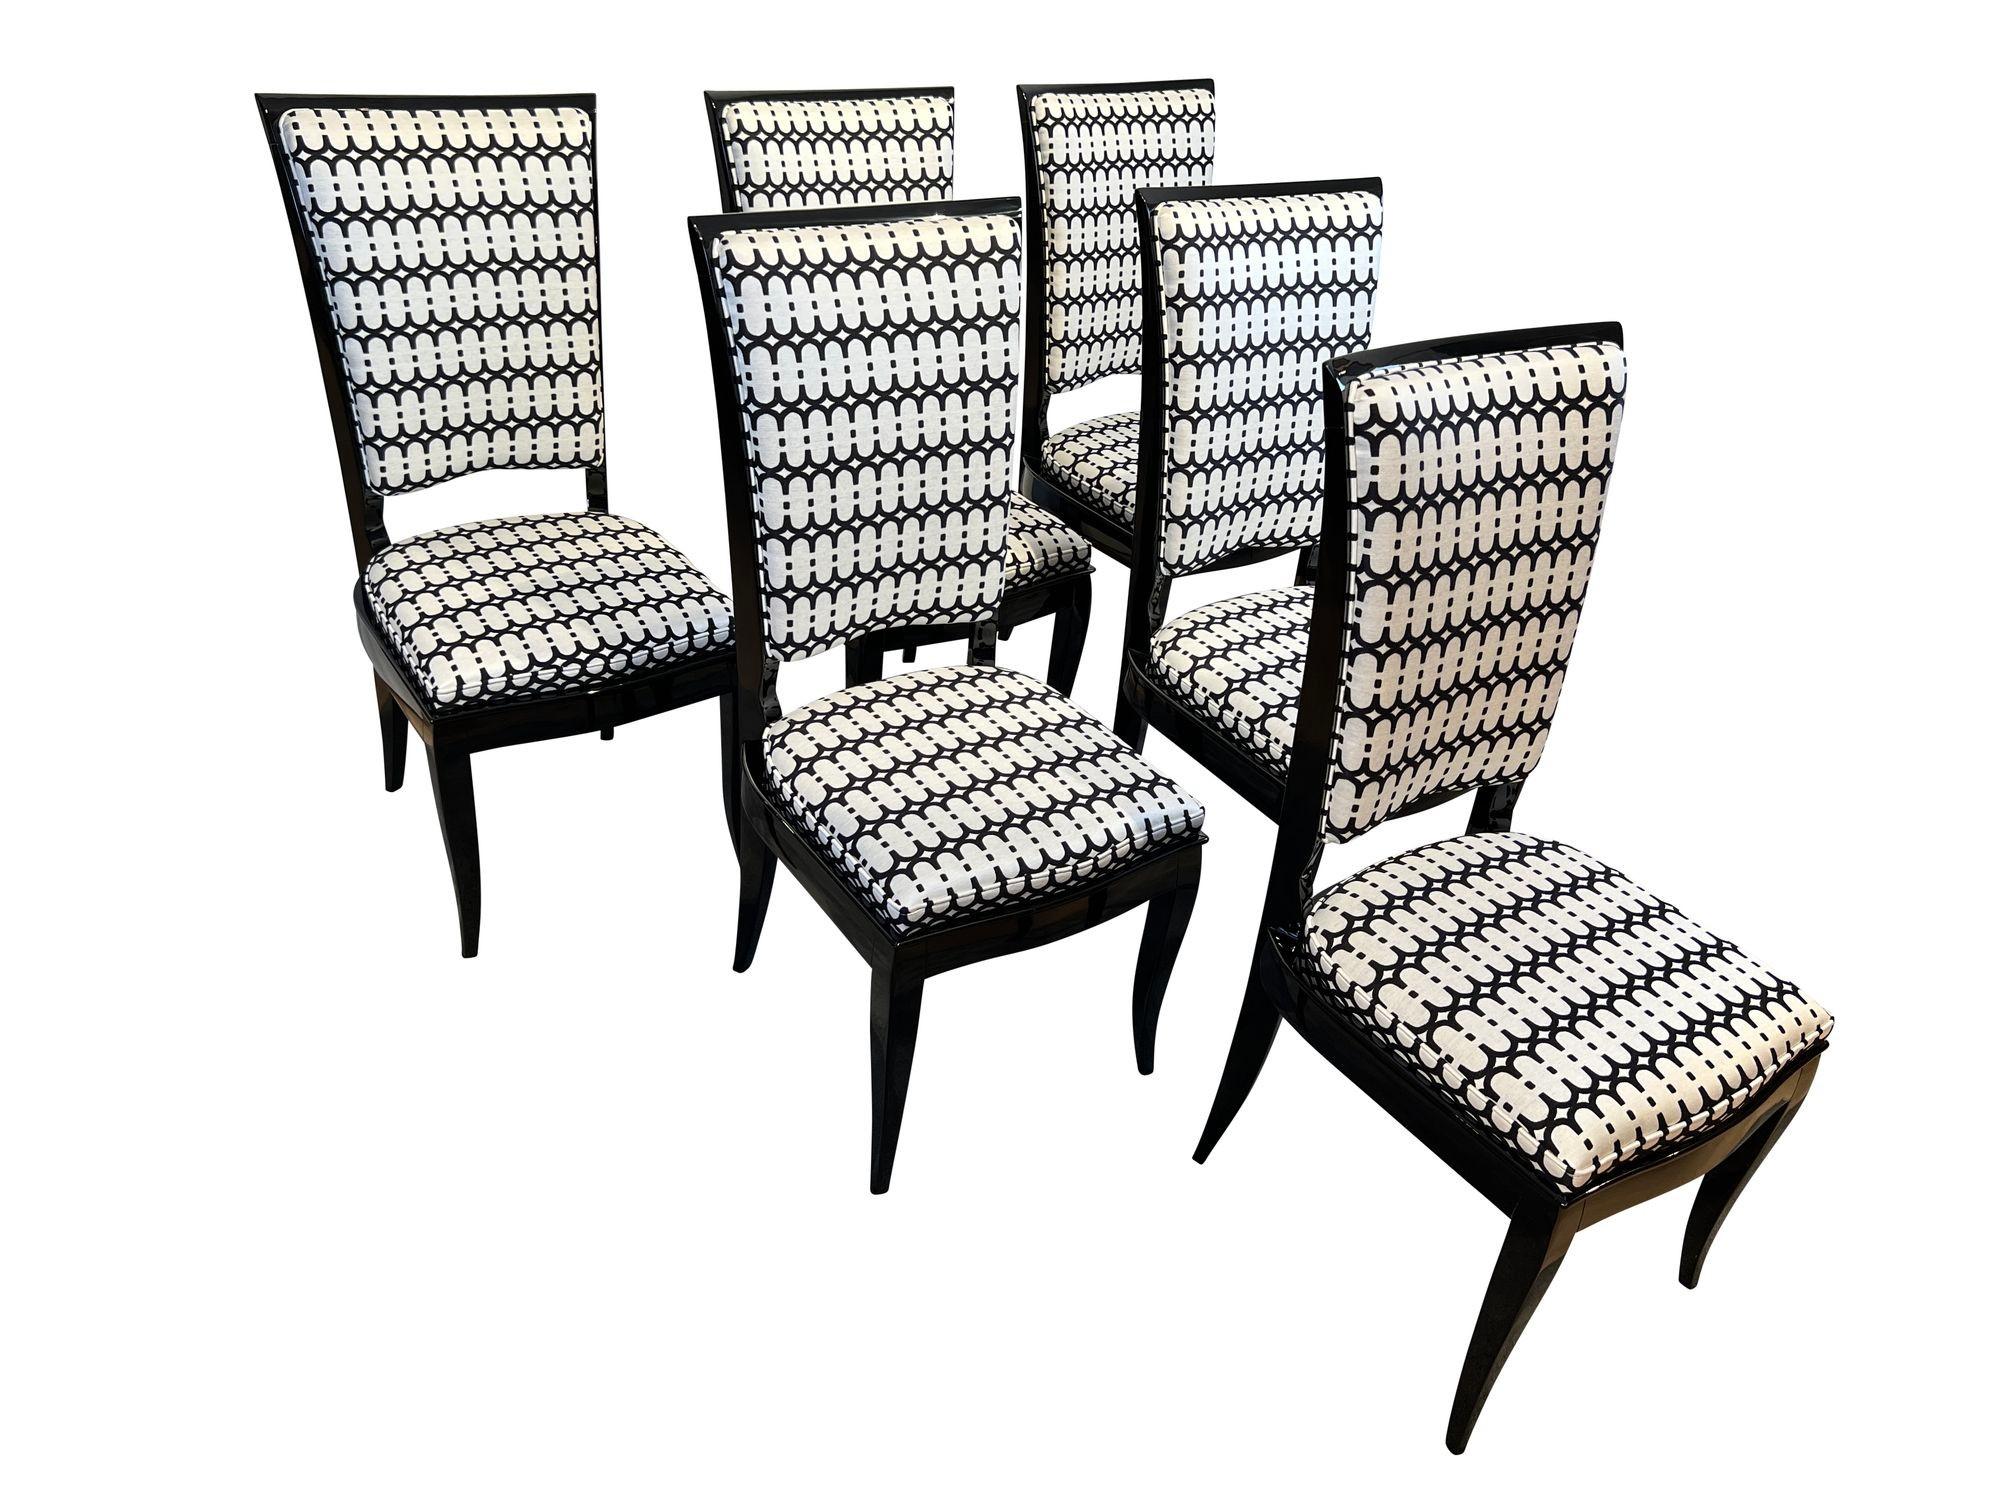 Set of Six Art Deco High Back Dining Chairs, Black Lacquer, France circa 1930

Beautiful set of 6 Art Deco so called 